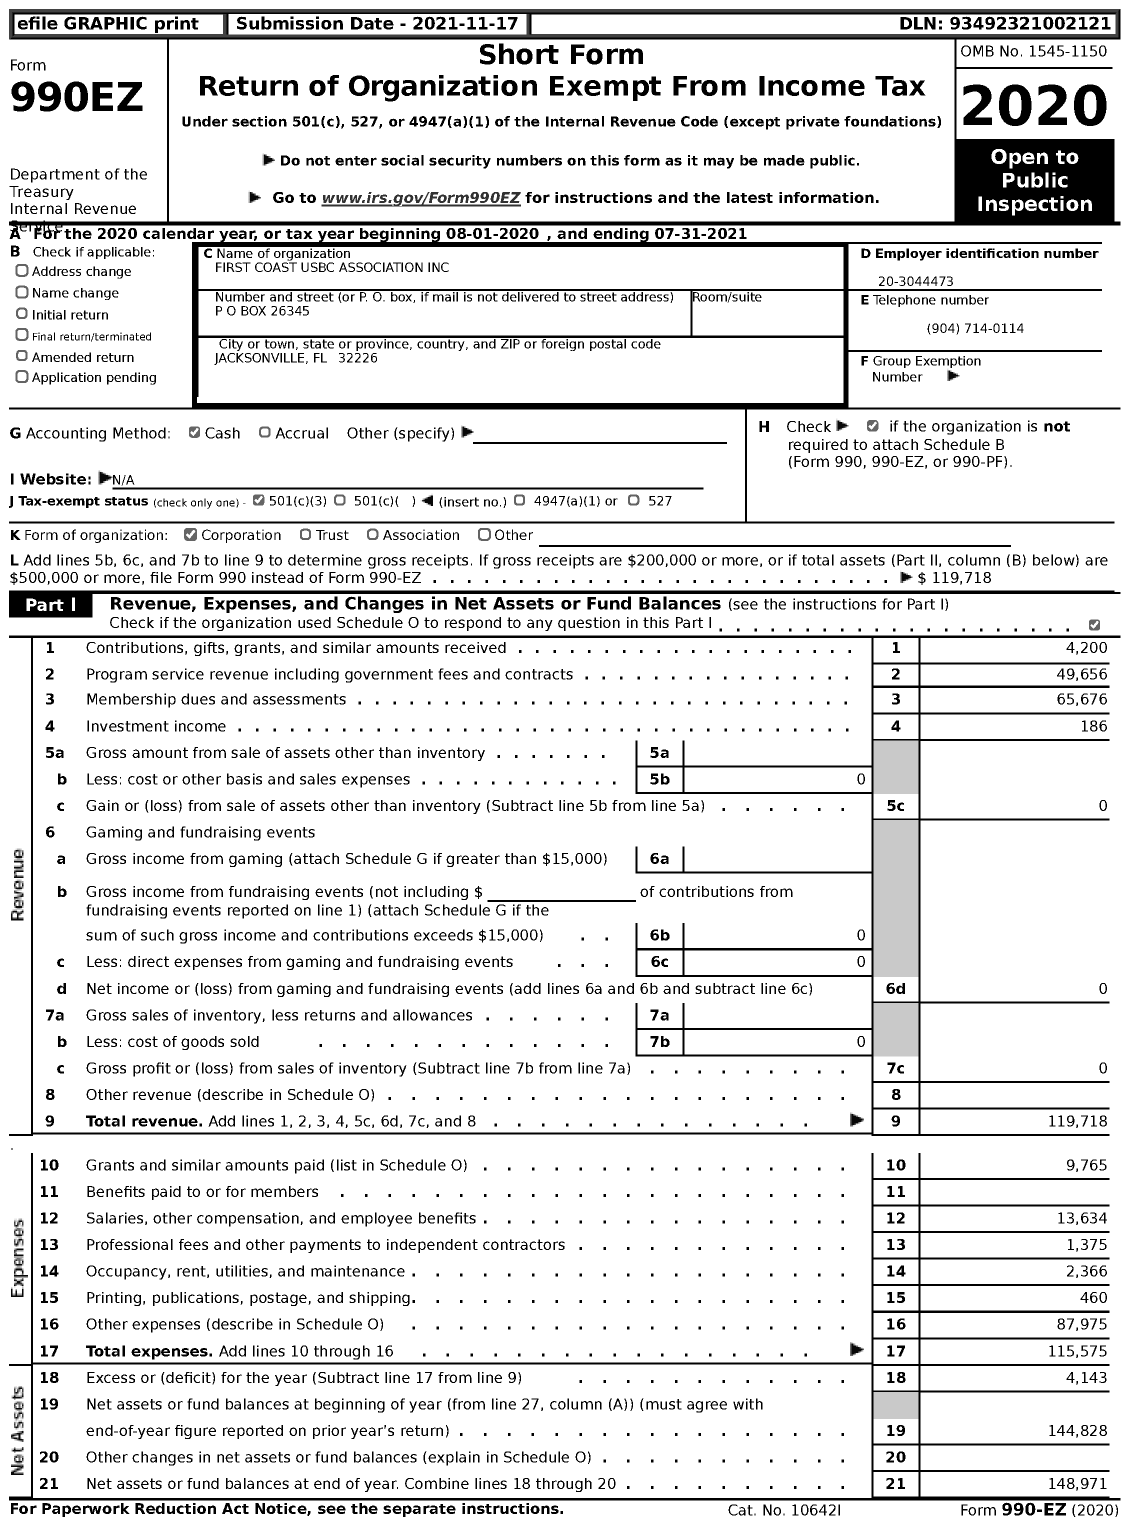 Image of first page of 2020 Form 990EZ for United States Bowling Congress - 82117 First Coast Usbc